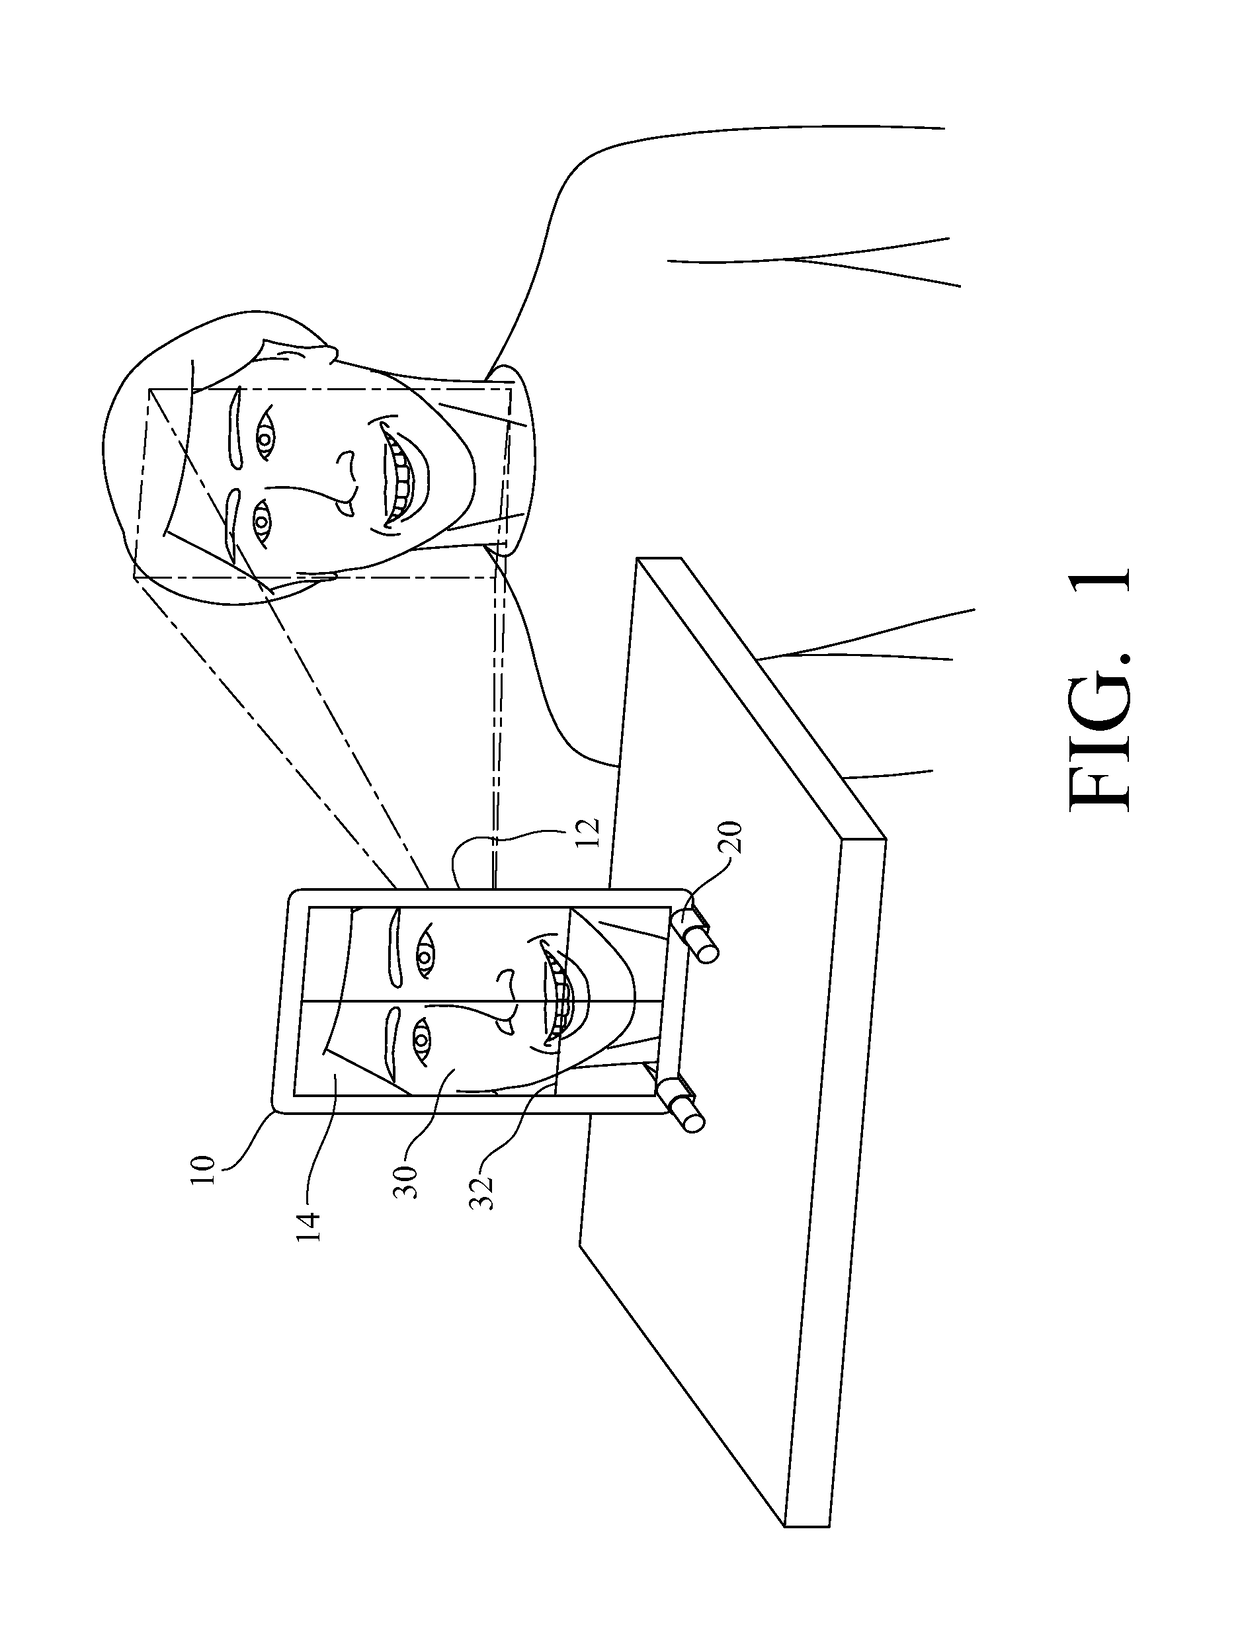 Method and system for recording characteristics of the occlusal arch of a patient using a portable computing device